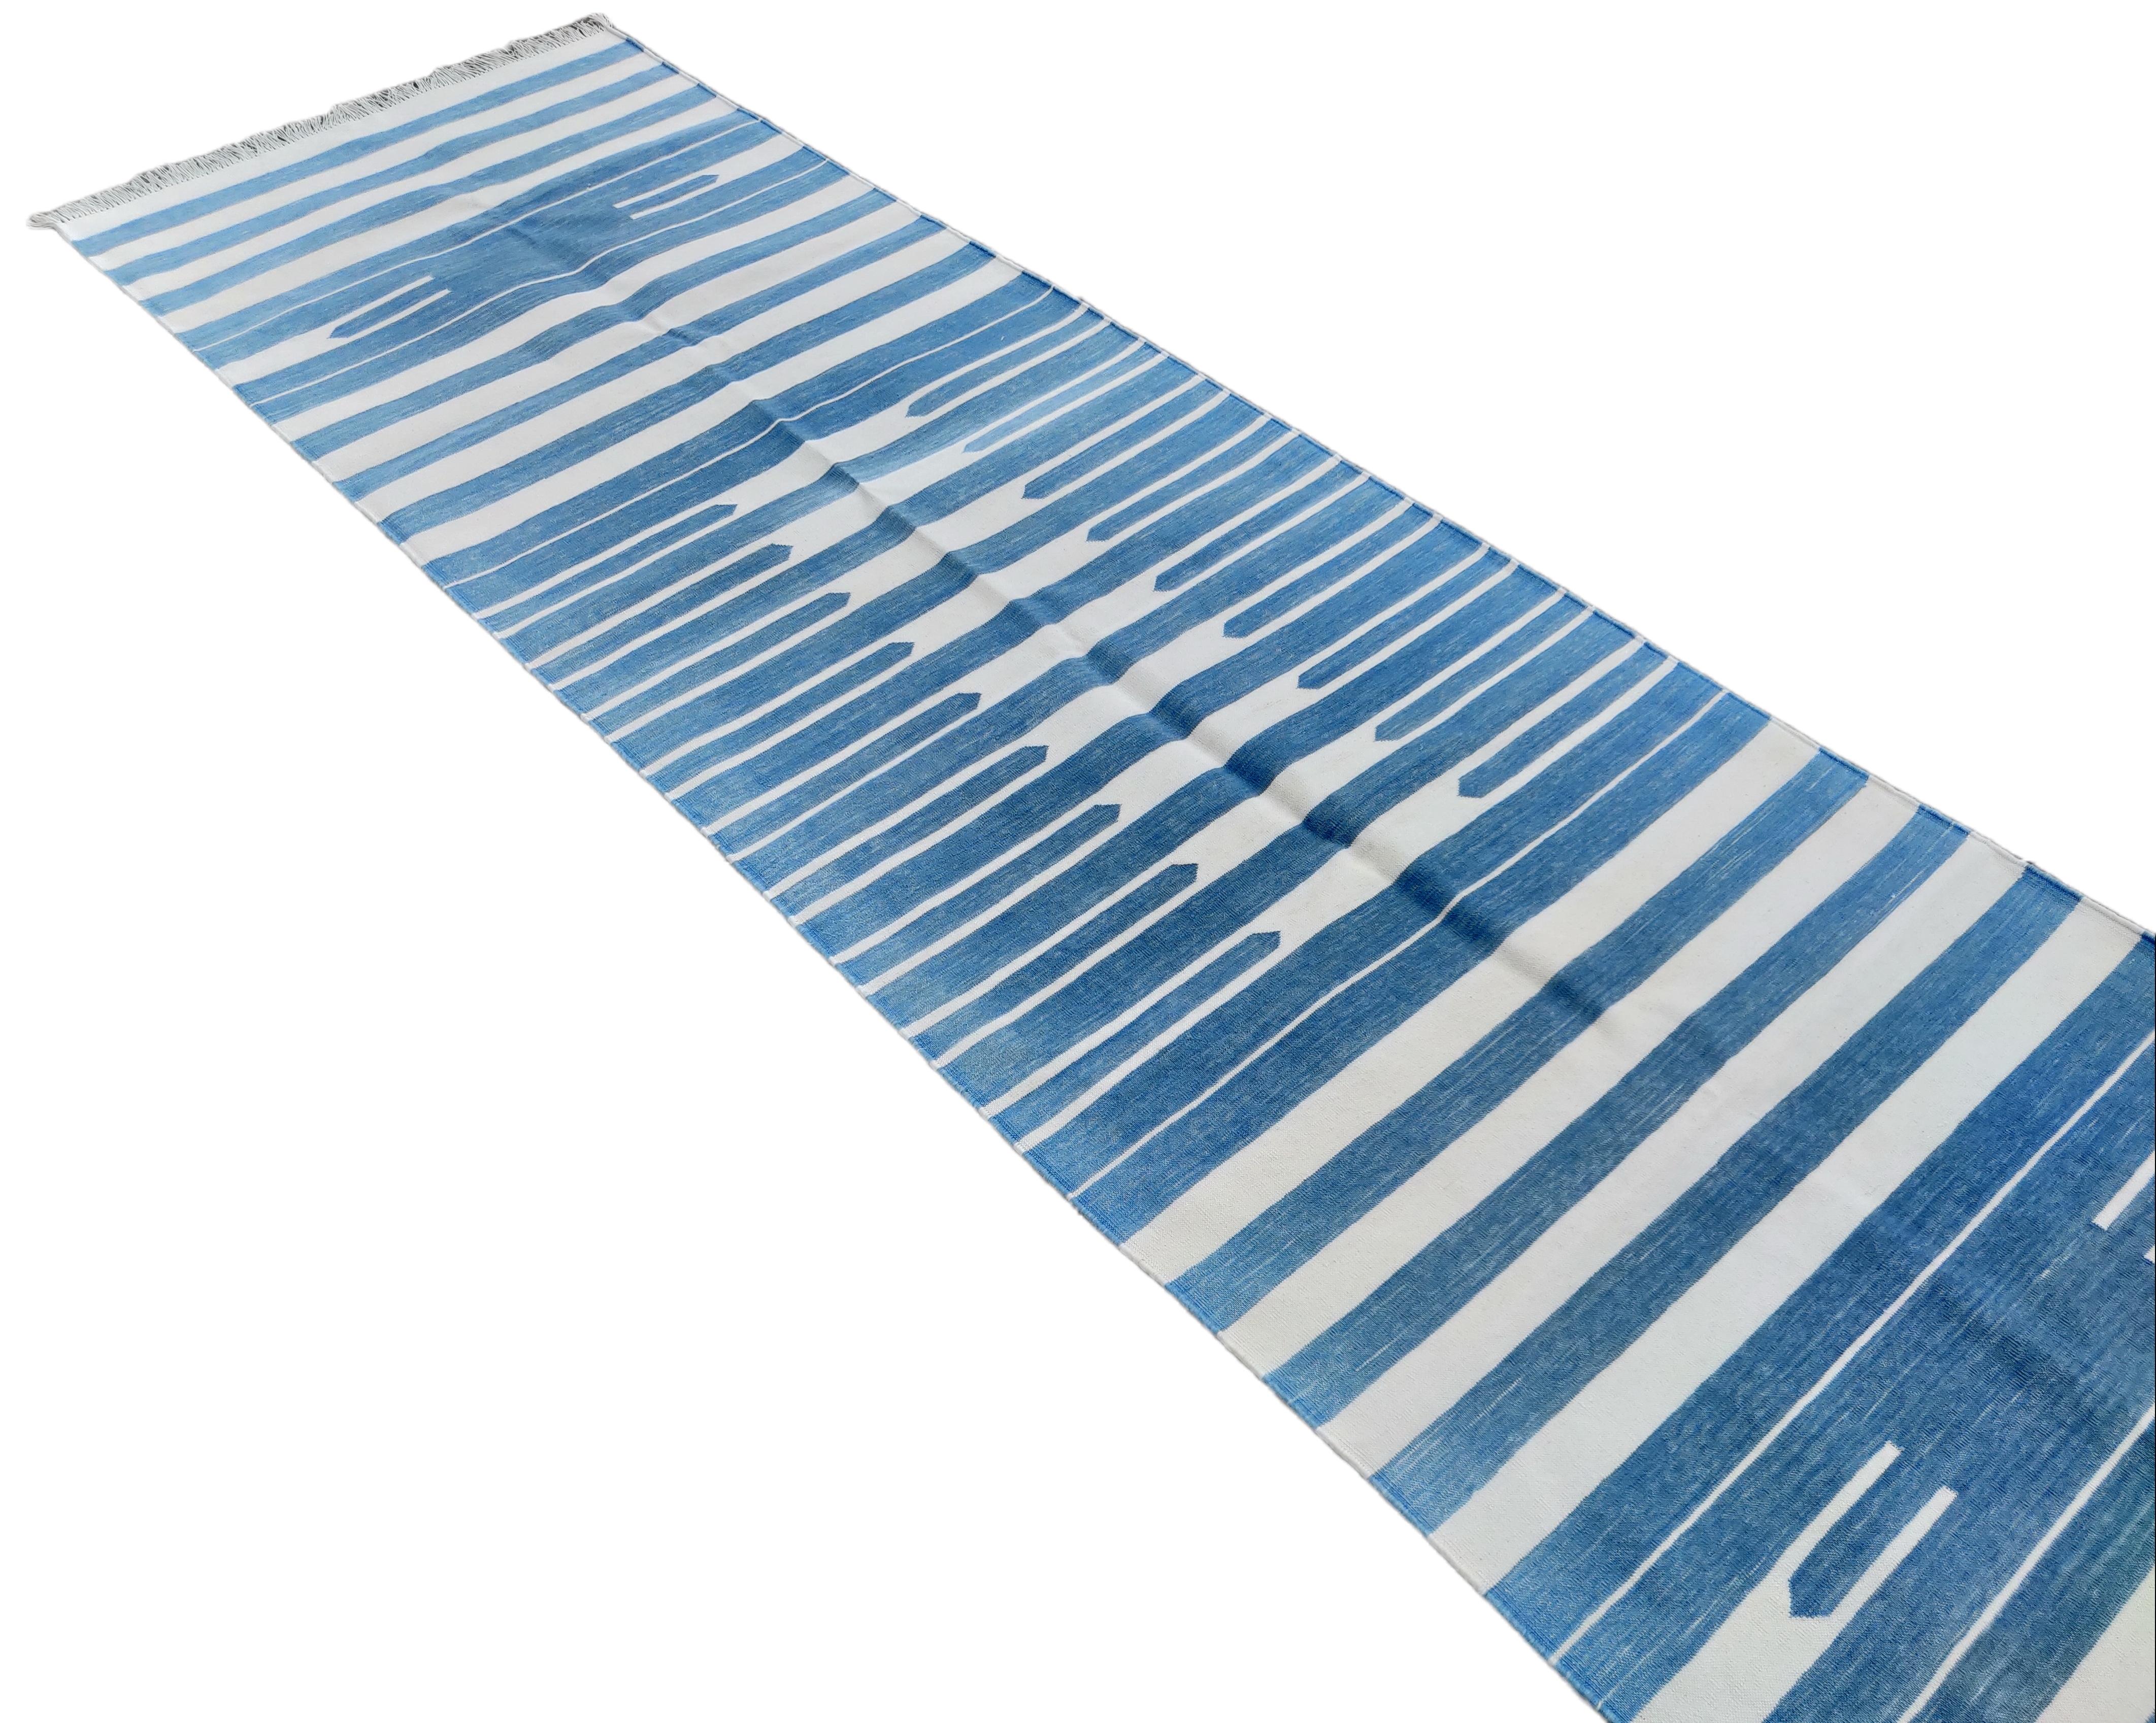 Indian Handmade Cotton Area Flat Weave Runner, 3x12 Blue And White Striped Dhurrie Rug For Sale